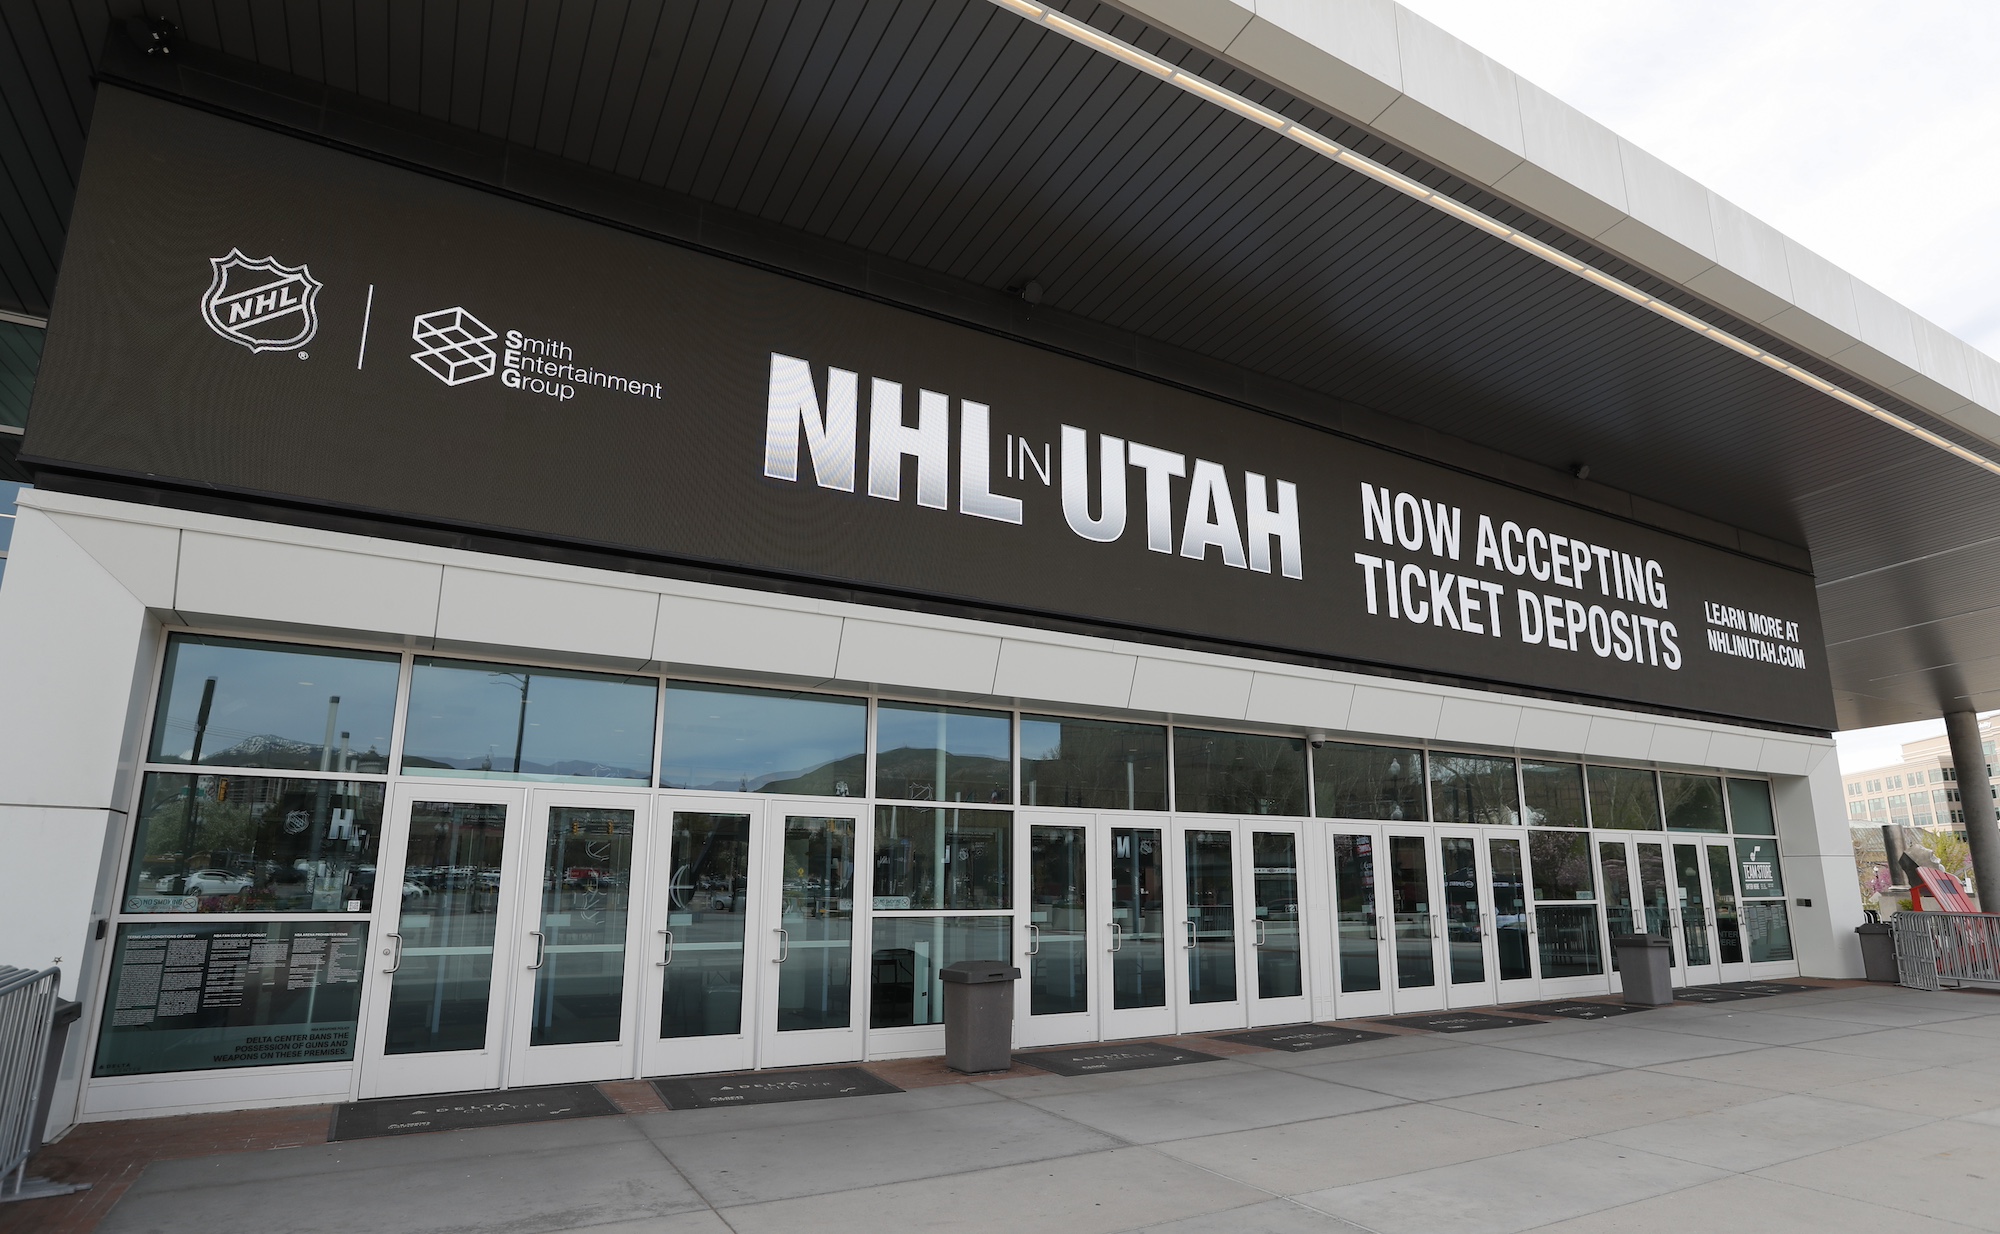 SALT LAKE CITY, UT - APRIL 19: The main entrance of the Delta Center is seen with the "NHL in Utah" logos on April 19, 2024 in Salt Lake City, Utah. The NHL has allowed the sale of the Arizona Coyotes and the team will relocate to Salt Lake City, Utah. (Photo by Chris Gardner/Getty Images)